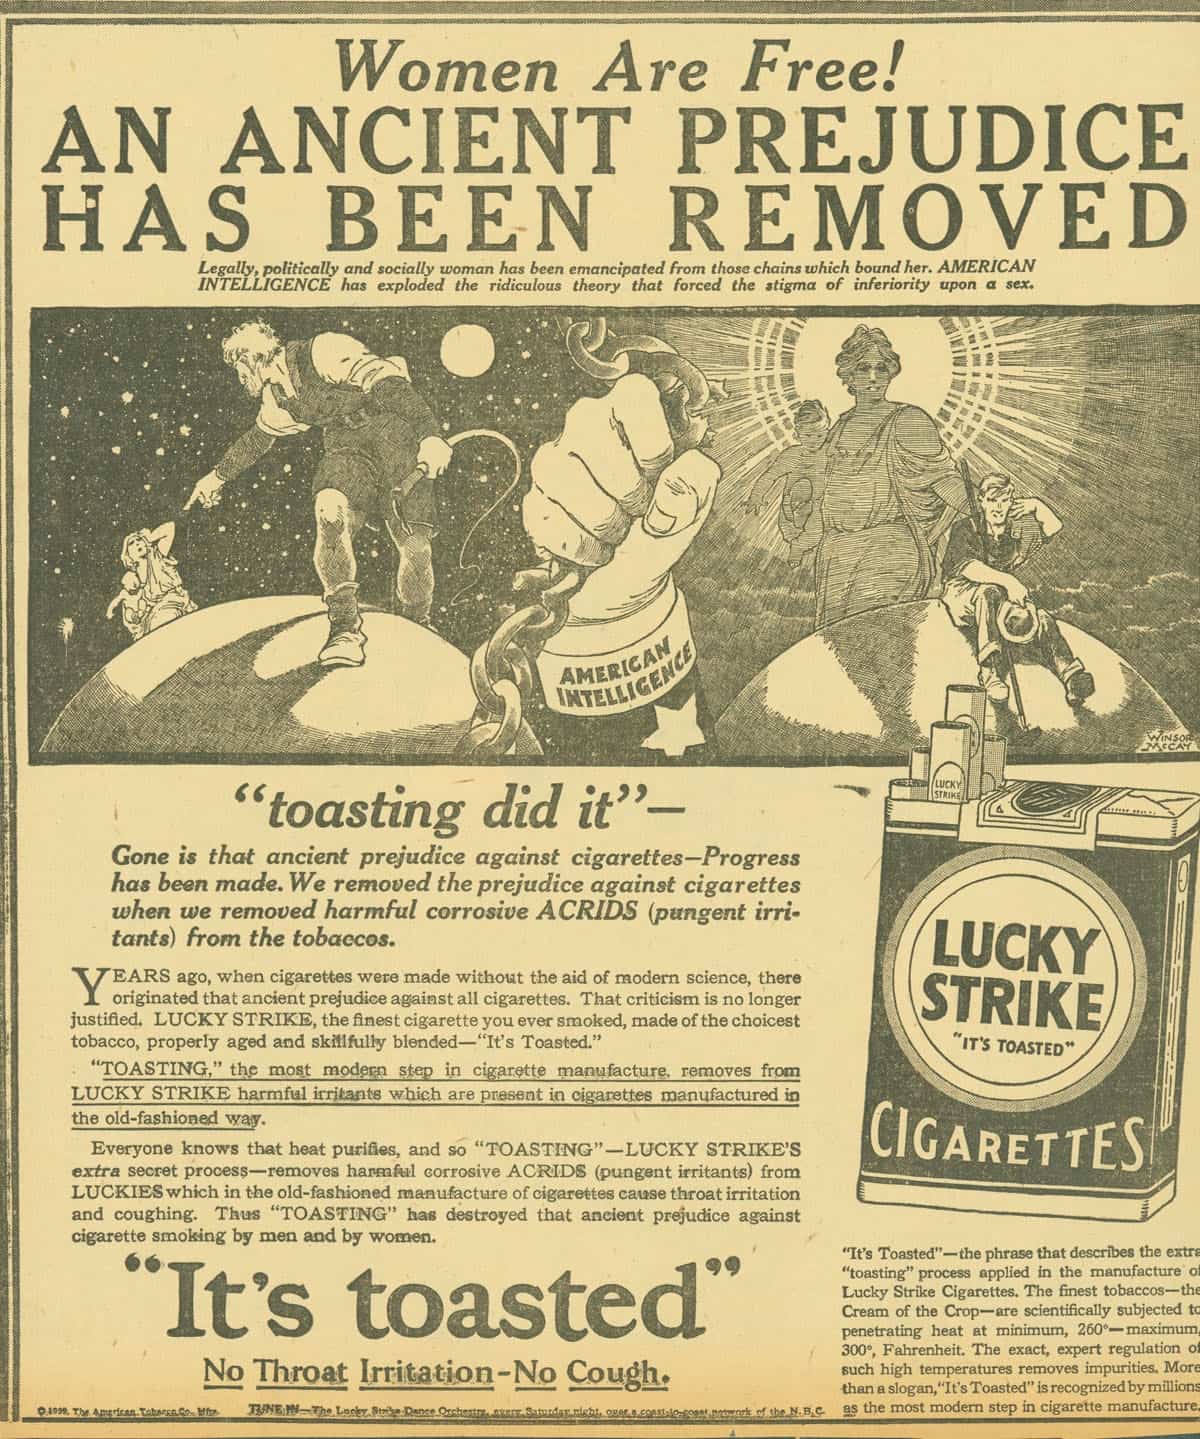 A 1929 ad for Lucky Strike cigarettes capitalizing on the women’s liberation movement. Source: Stanford Research Into the Impact of Tobacco Advertising